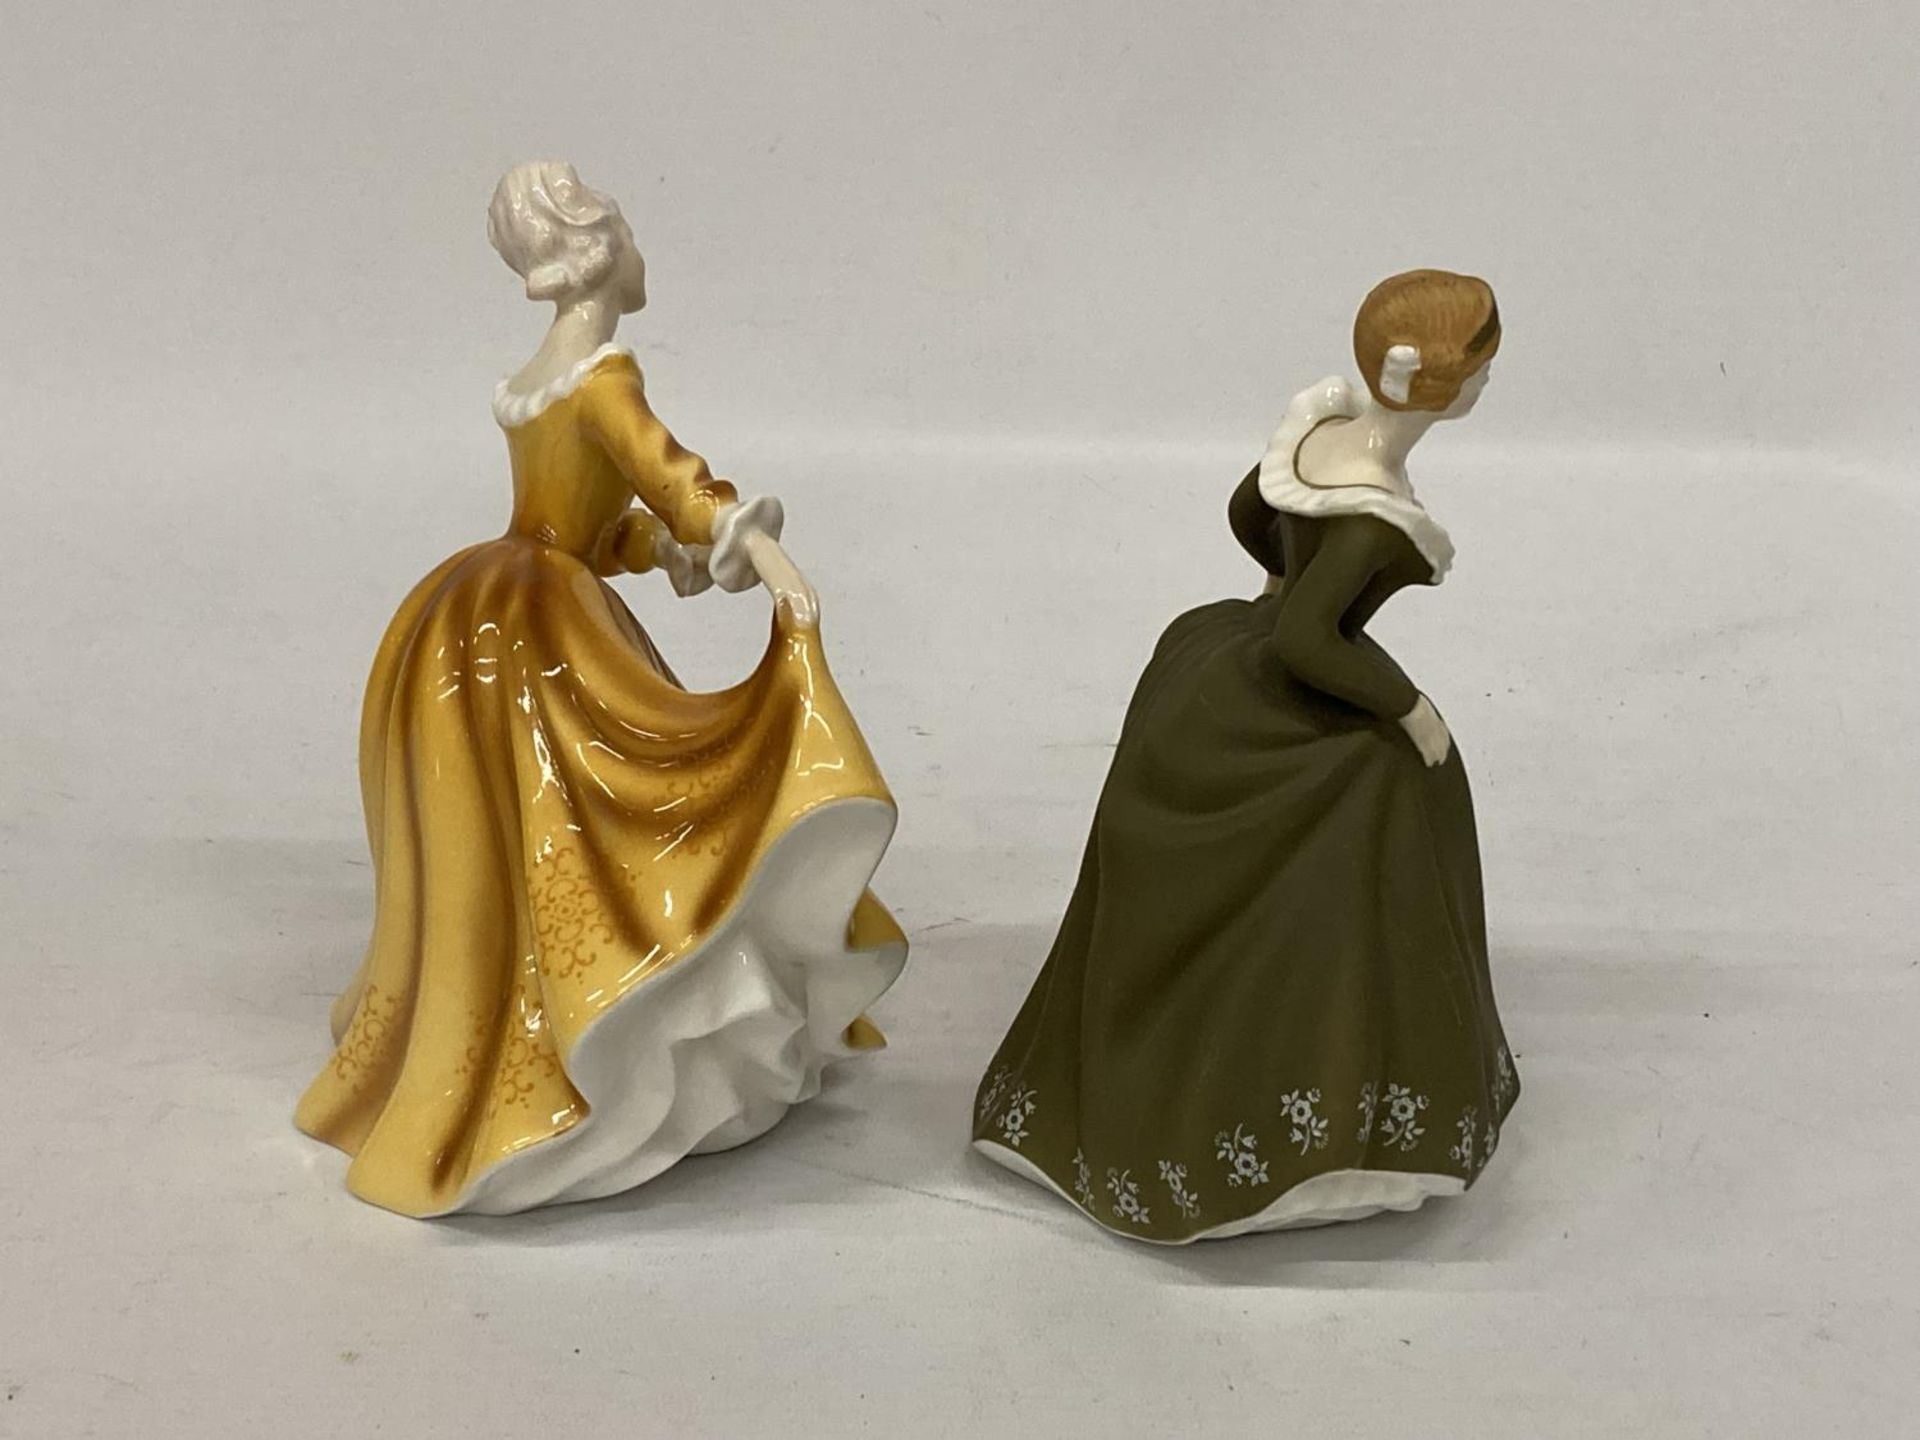 TWO ROYAL DOULTON FIGURINES "KIRSTY" HN2381 AND "GERALDINE" HN 2348 - Image 2 of 4